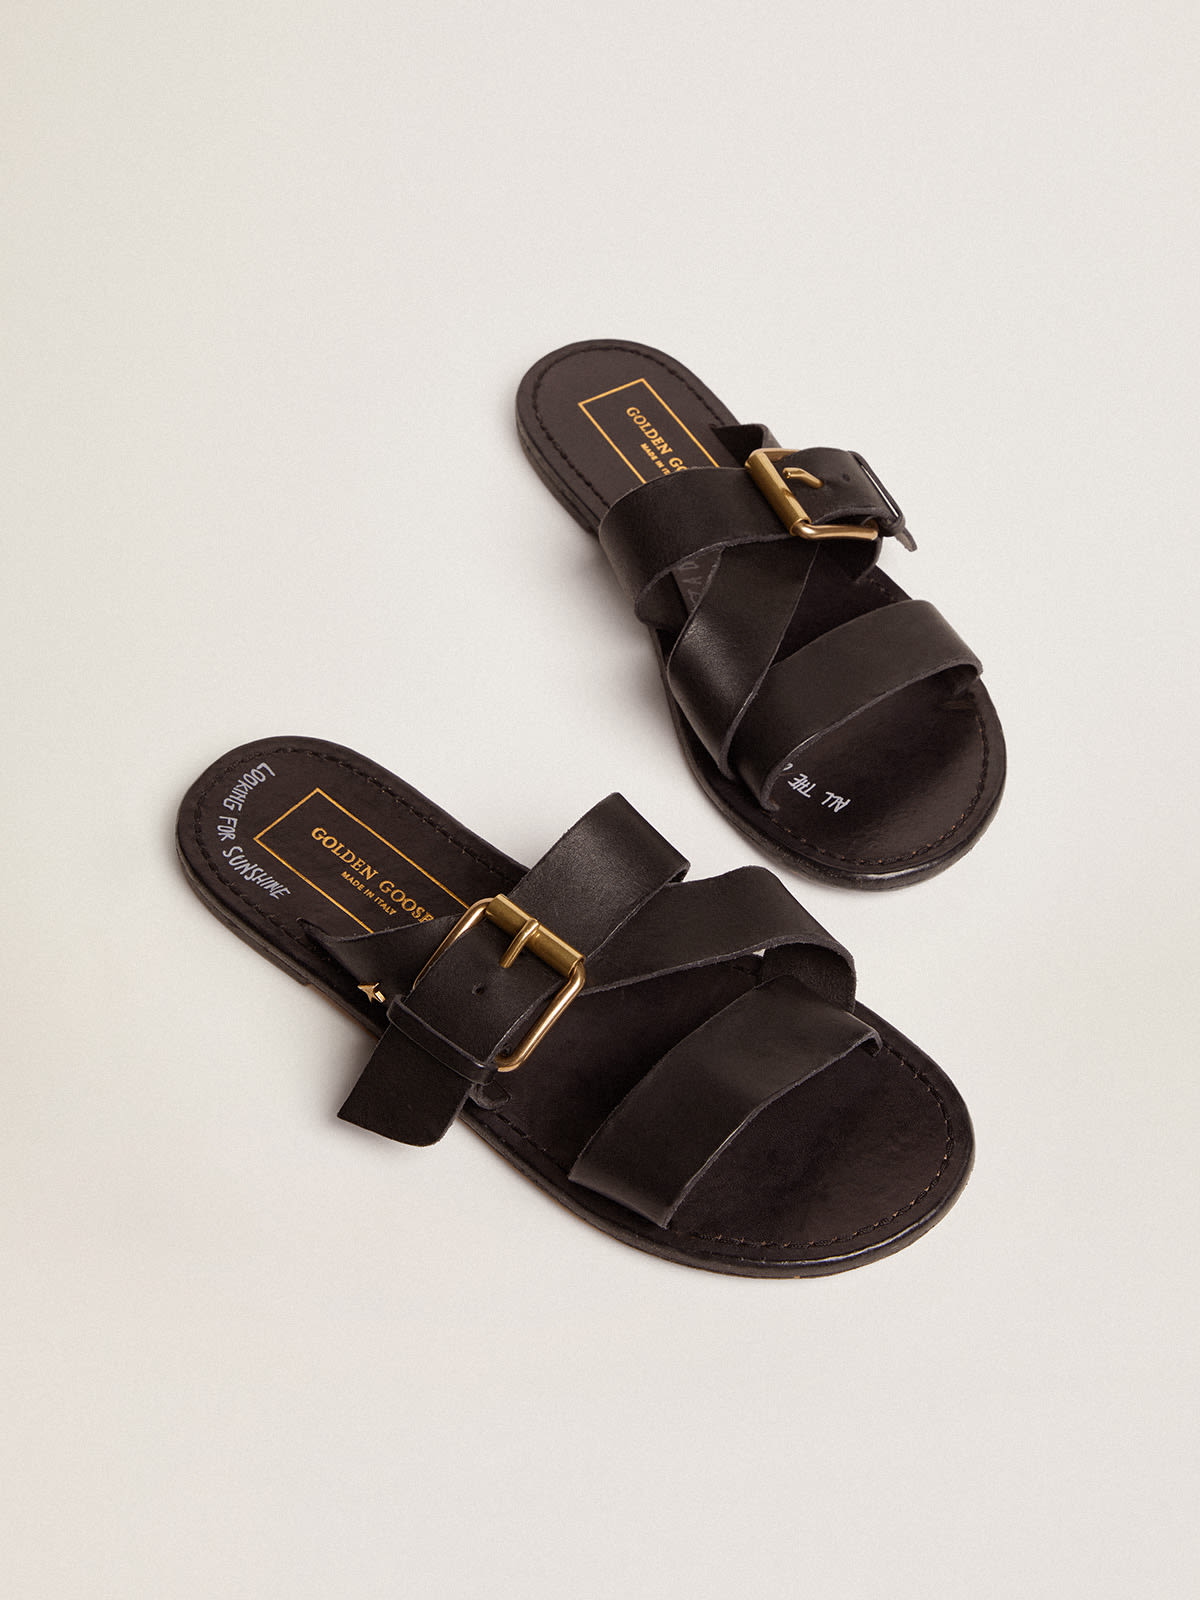 Golden Goose - Women's flat sandals in black resin-coated leather in 